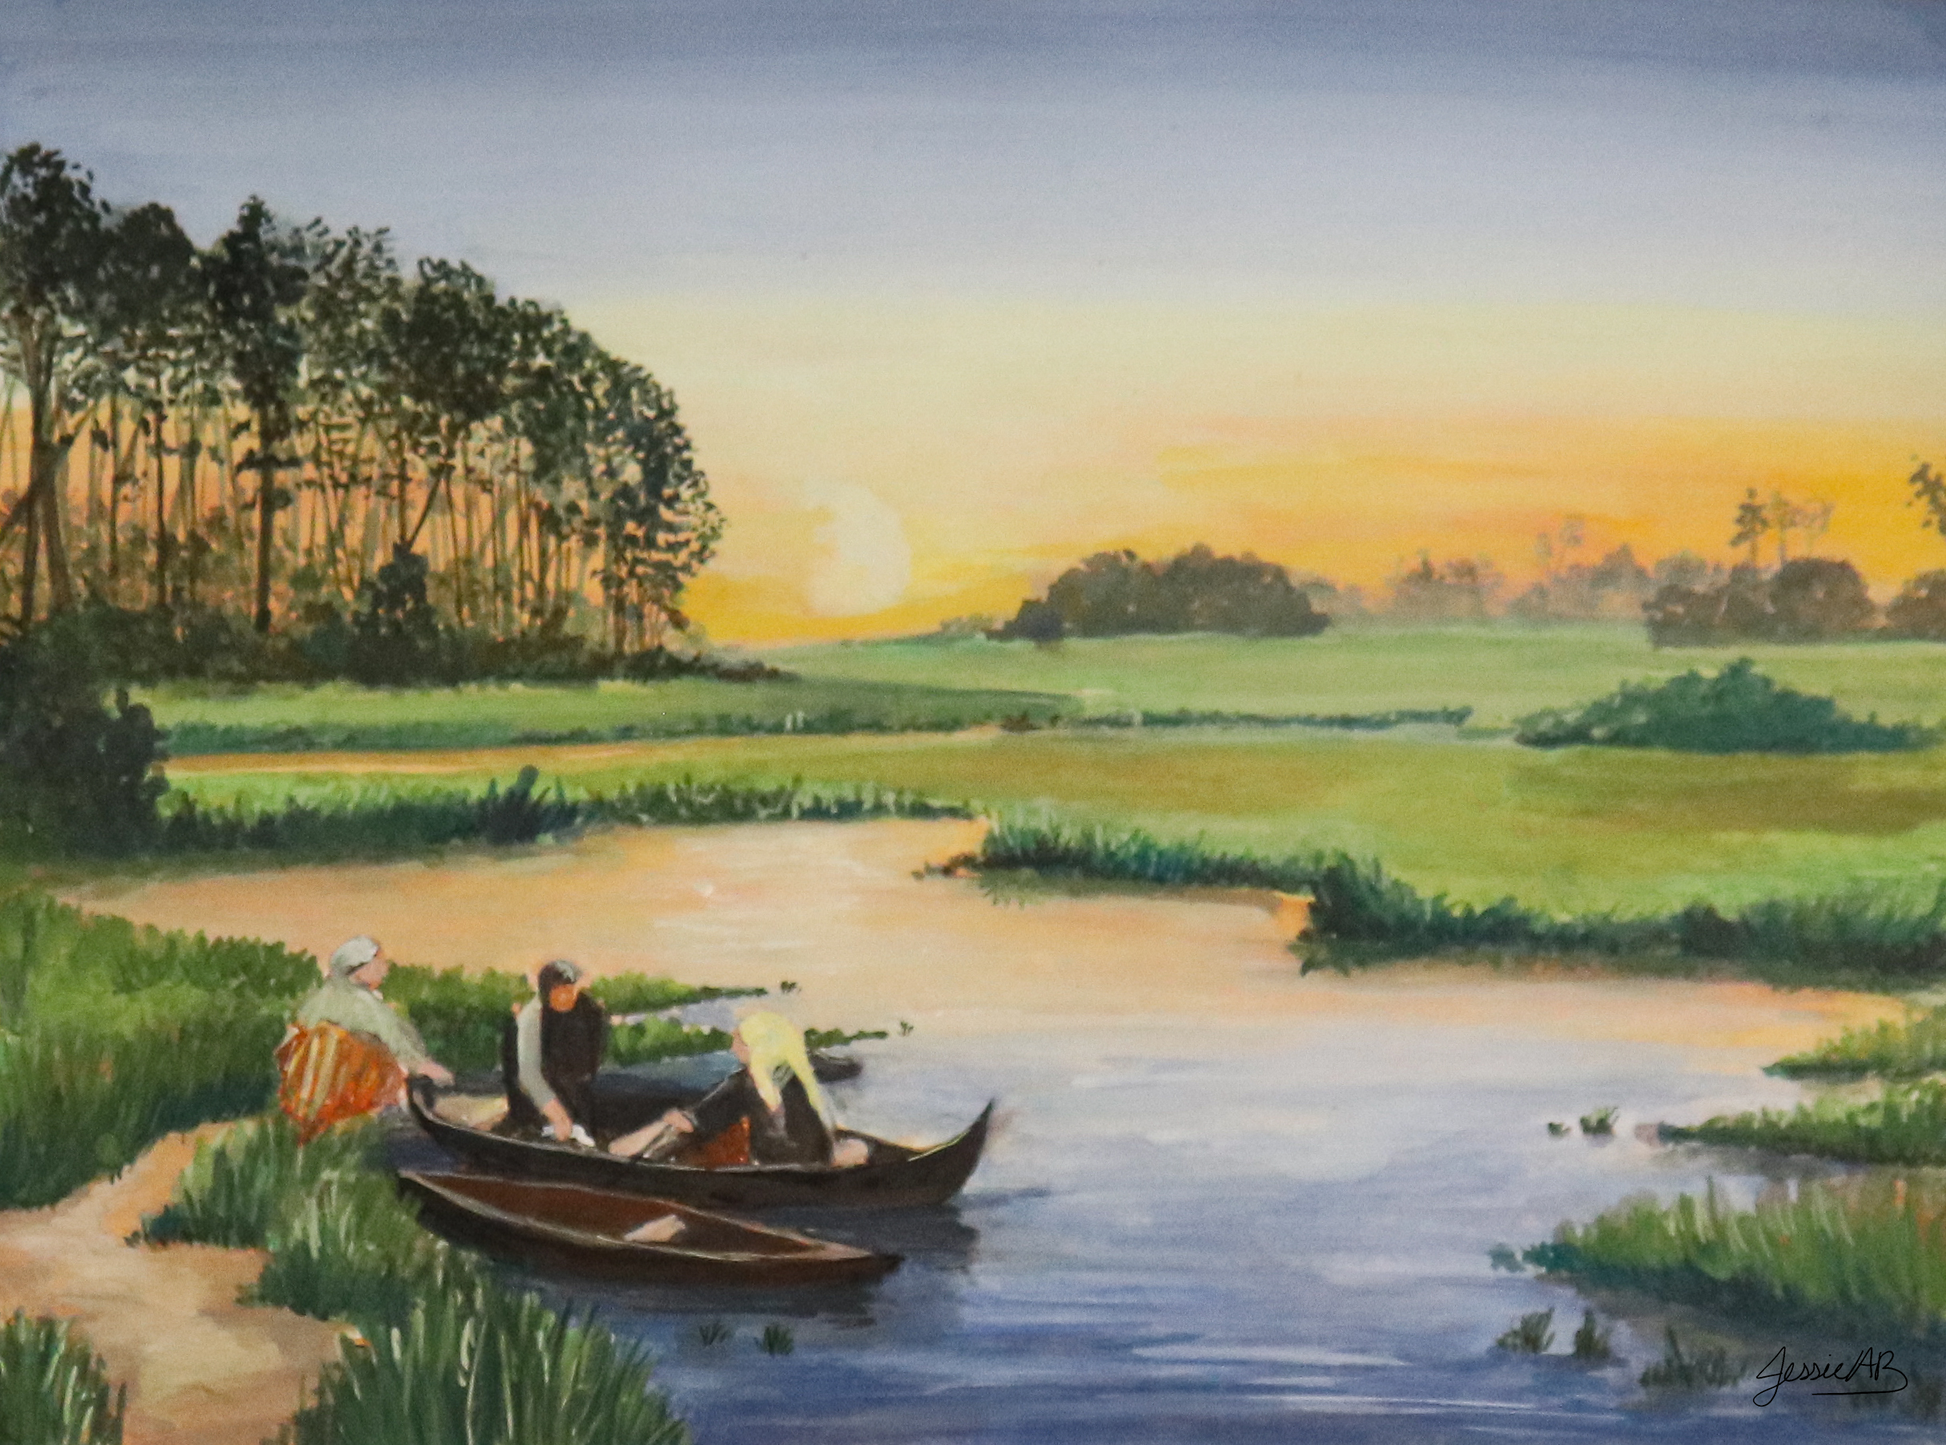 Silent Marsh is an original 12" by 9" gouache painting by Jessie Bettersworth